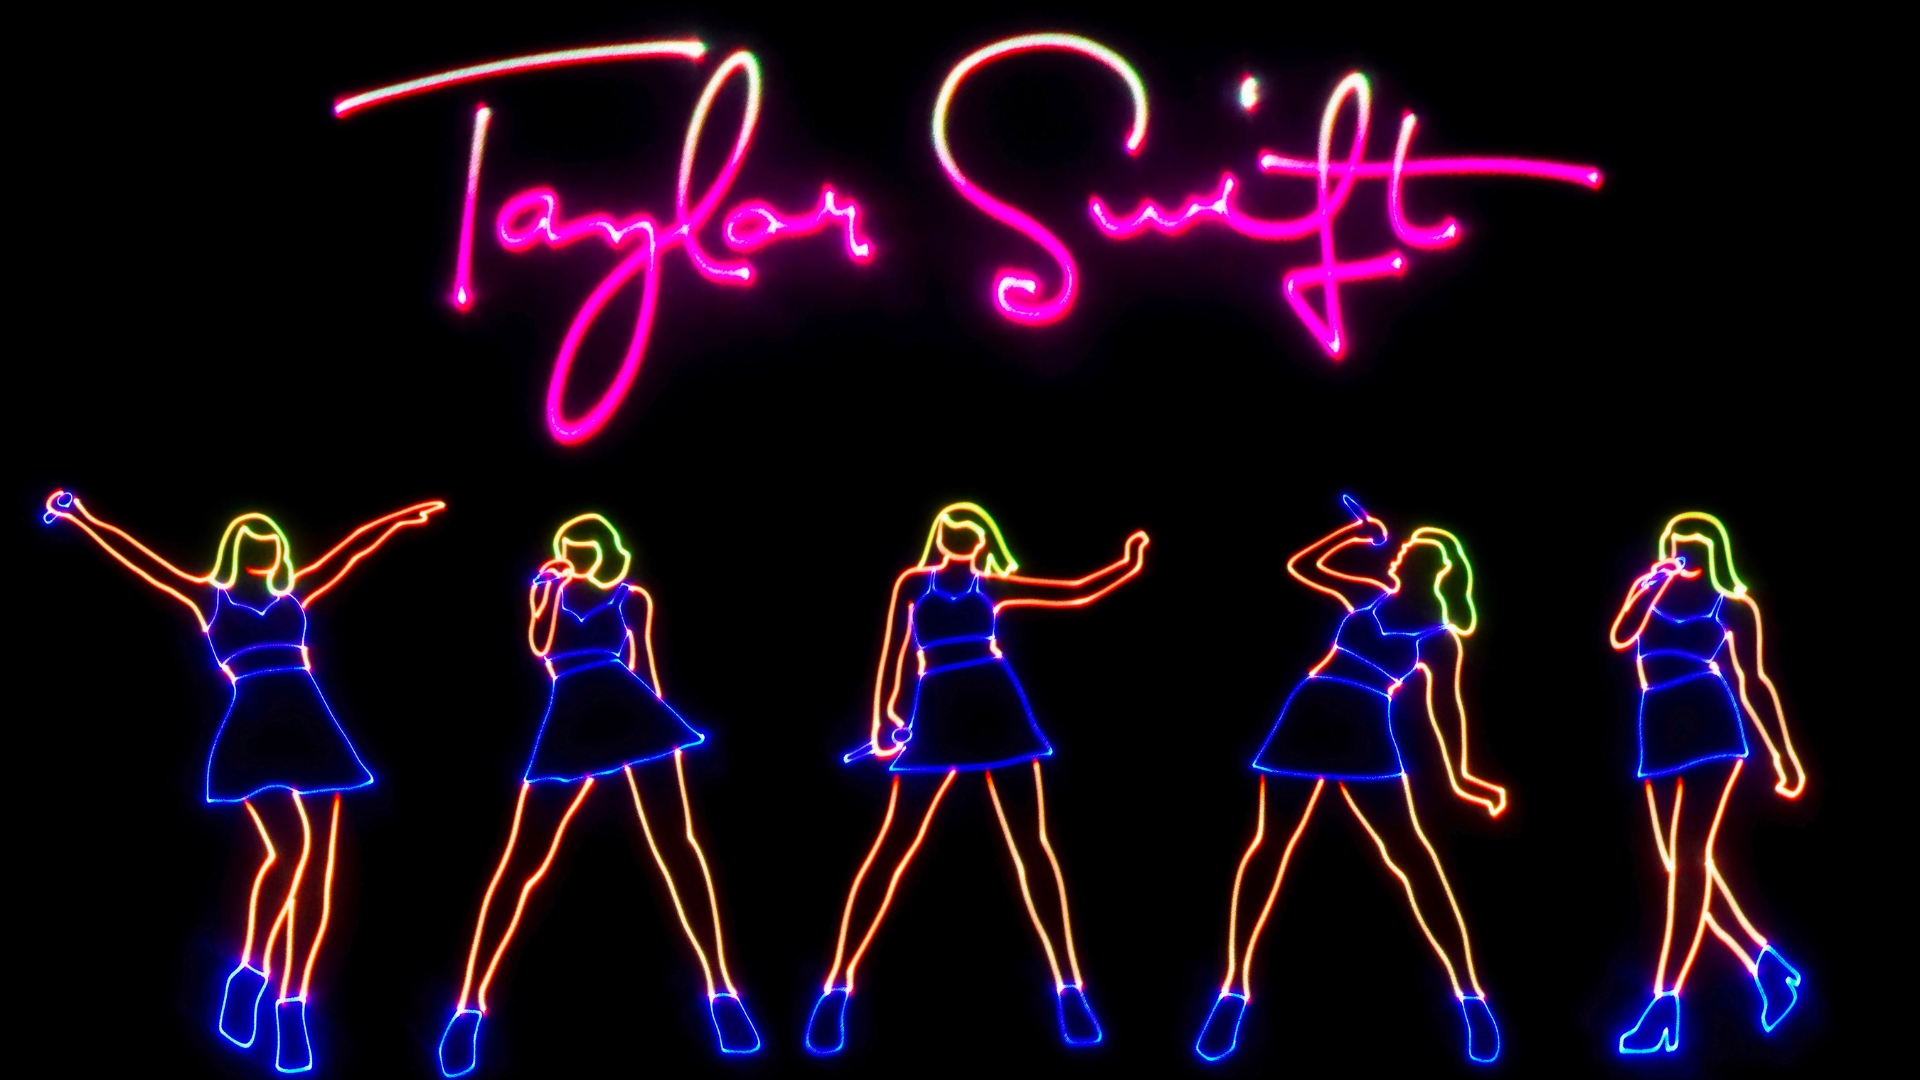 Taylor Swift Laser Evening Instagram Giveaway Sweepstakes - Frost Science